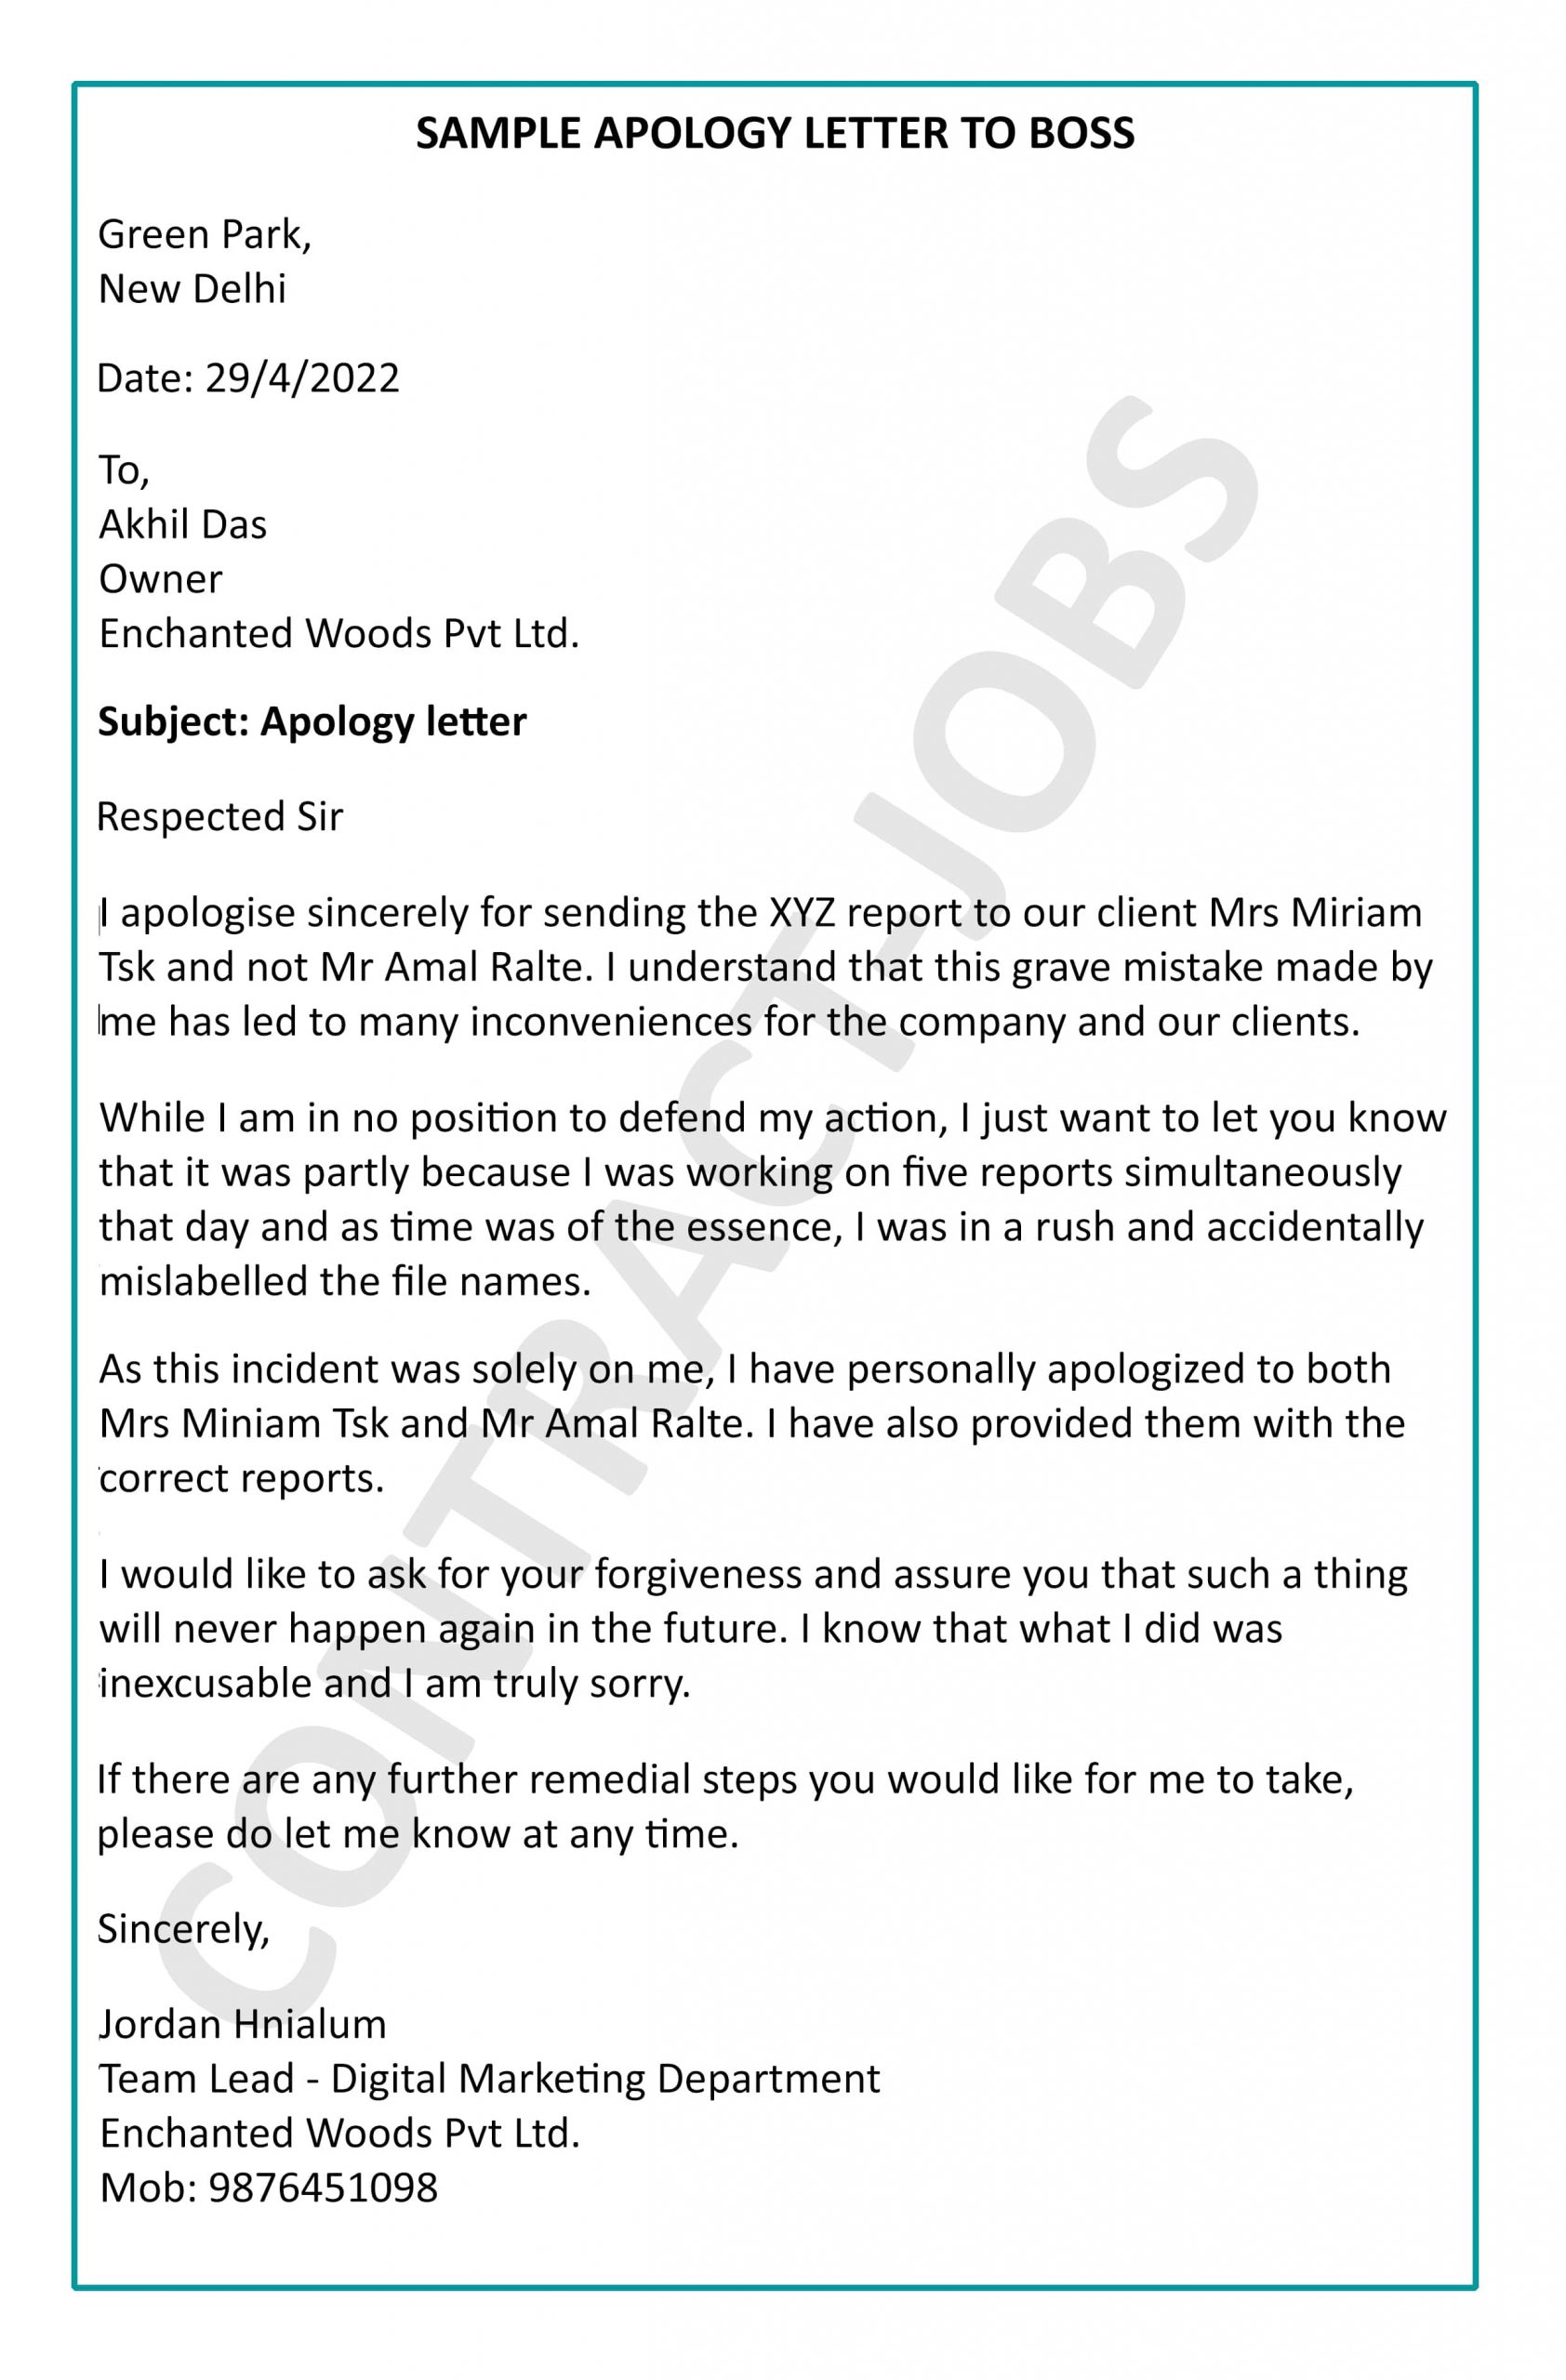 Apology Letter to Boss